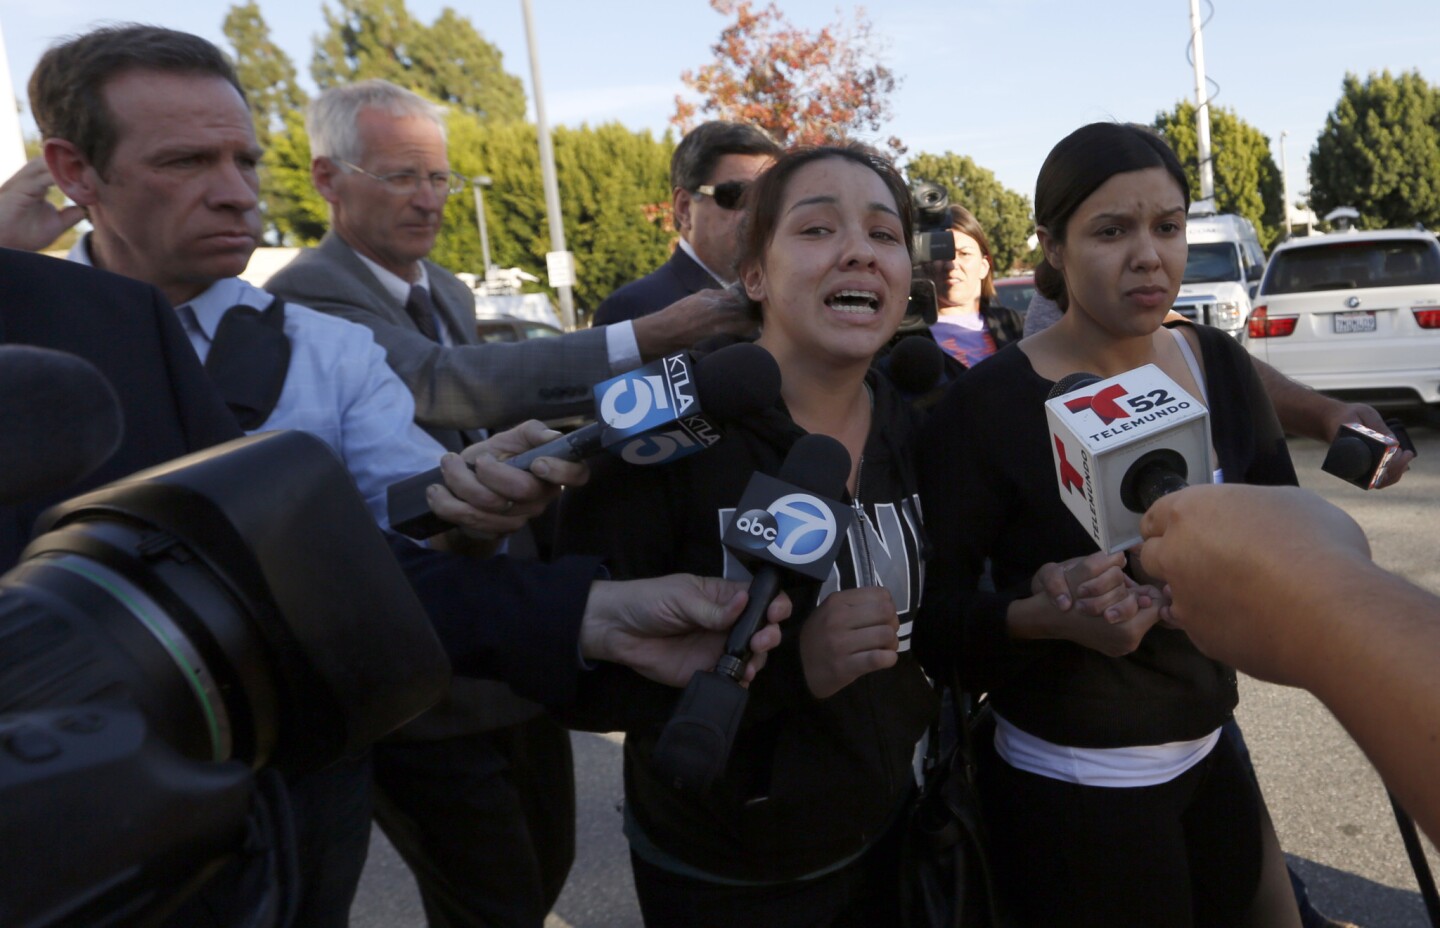 Maricela Alvarado, sister of suspect Abel Diaz, cries as she walks to her car, insisting the teenager was not responsible for the death ofOfficer Ricardo Galvez. "My brother is innocent. He is not the shooter," said Alvarado, 24.